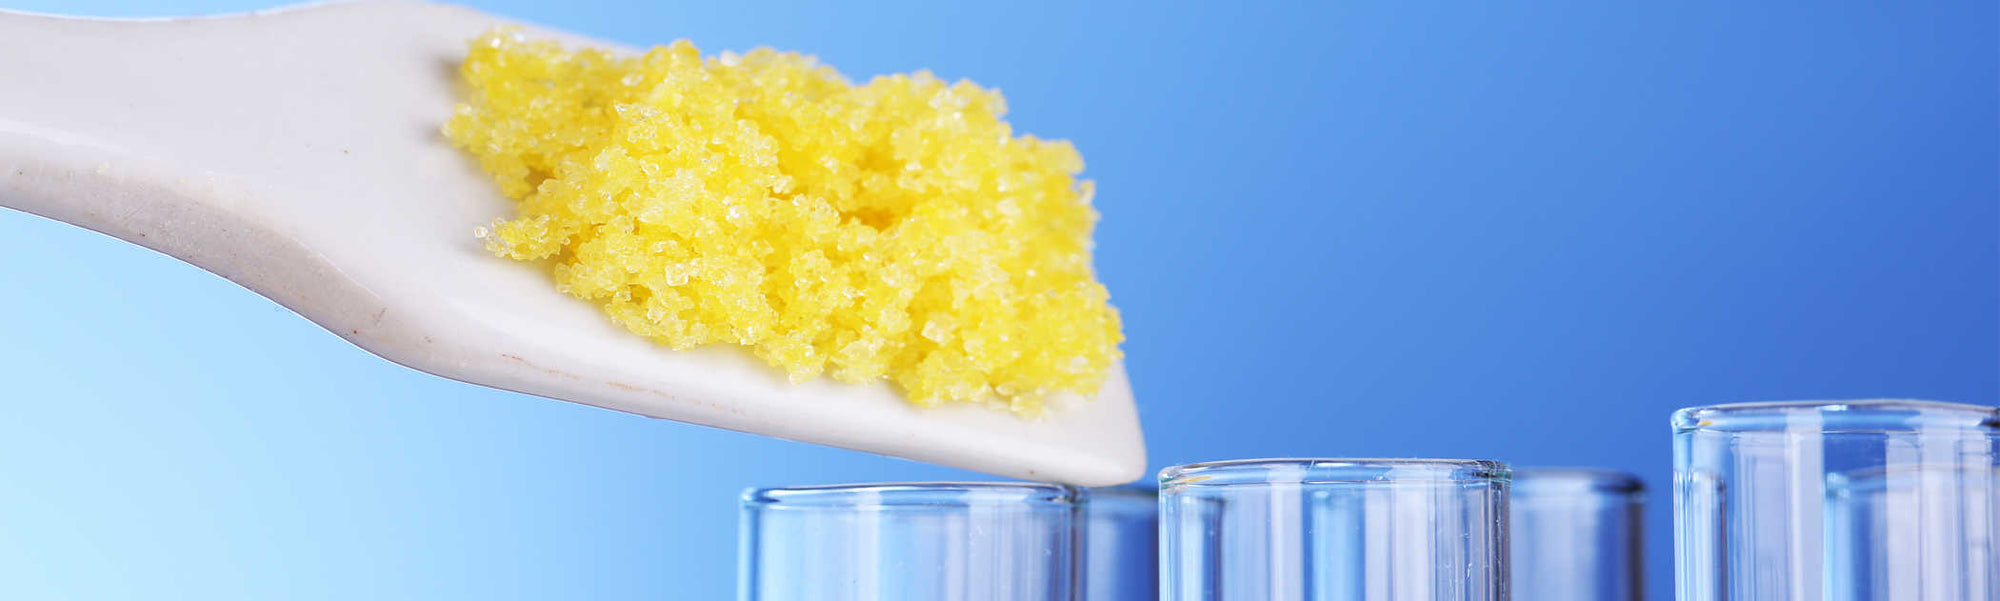 Sulphates In Your Skincare & Haircare Products: Are They Good Or Bad?